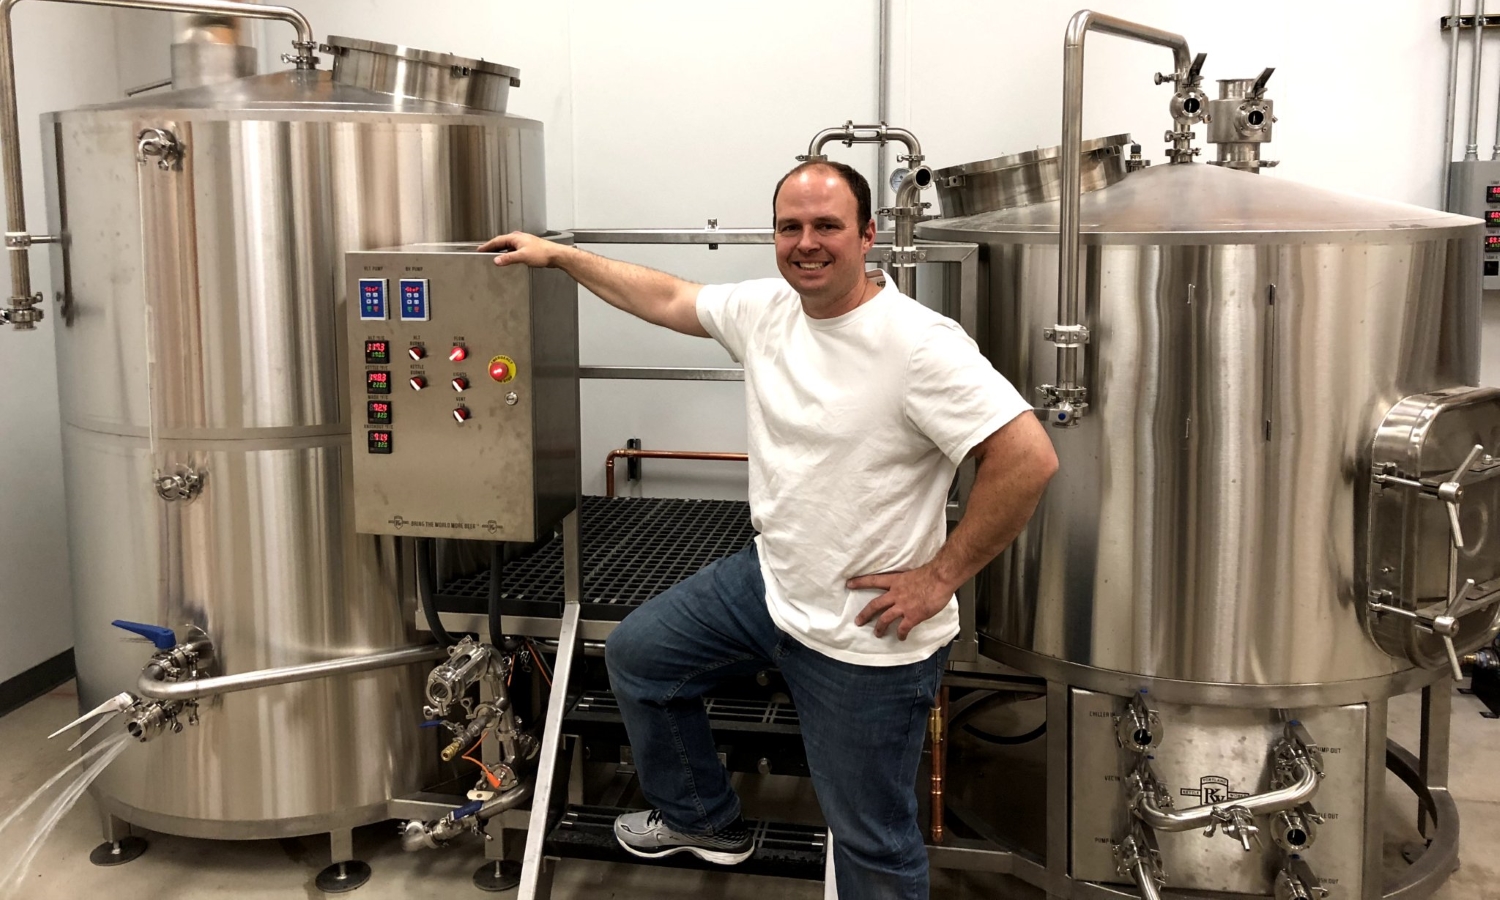 Raymond Miller, Brewmaster of Vizsla Brewing Made the Move From Homebrewer to Professional